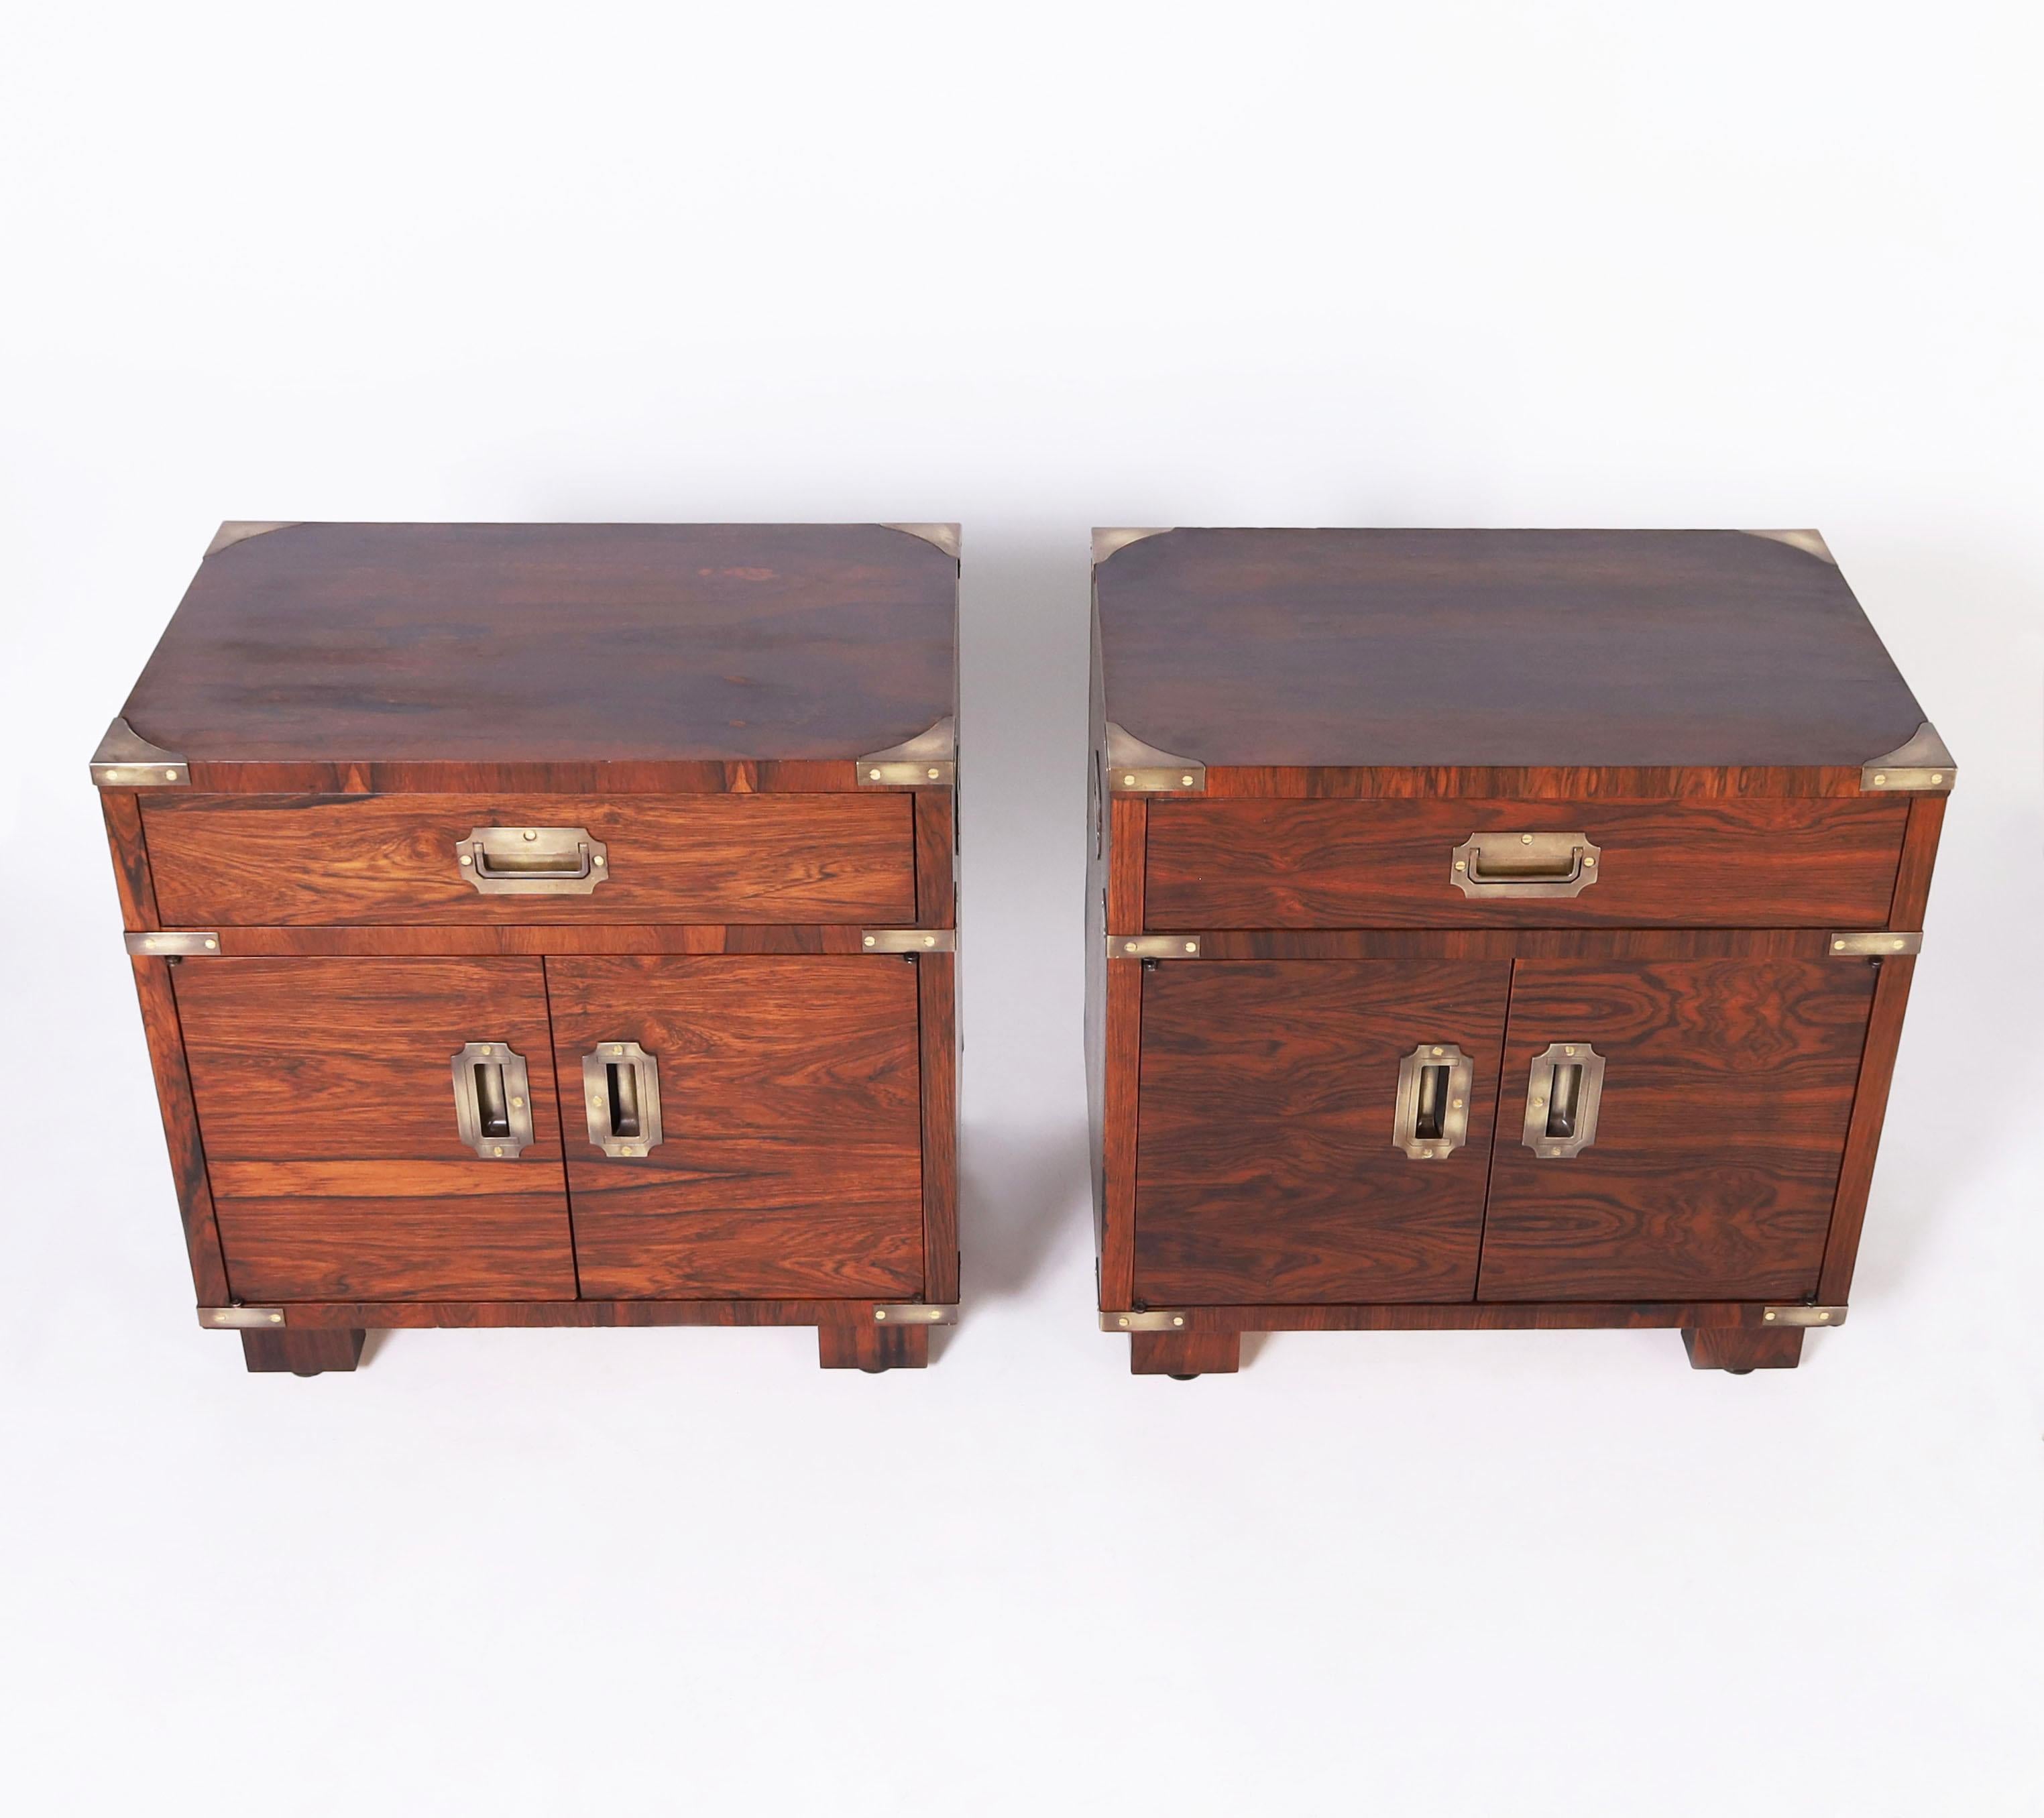 Chic pair of vintage campaign style stands crafted in dramatic grained rosewood with a drawer and two doors each, burnished brass hardware and simple block feet. Perfect marriage of modern and traditional design.